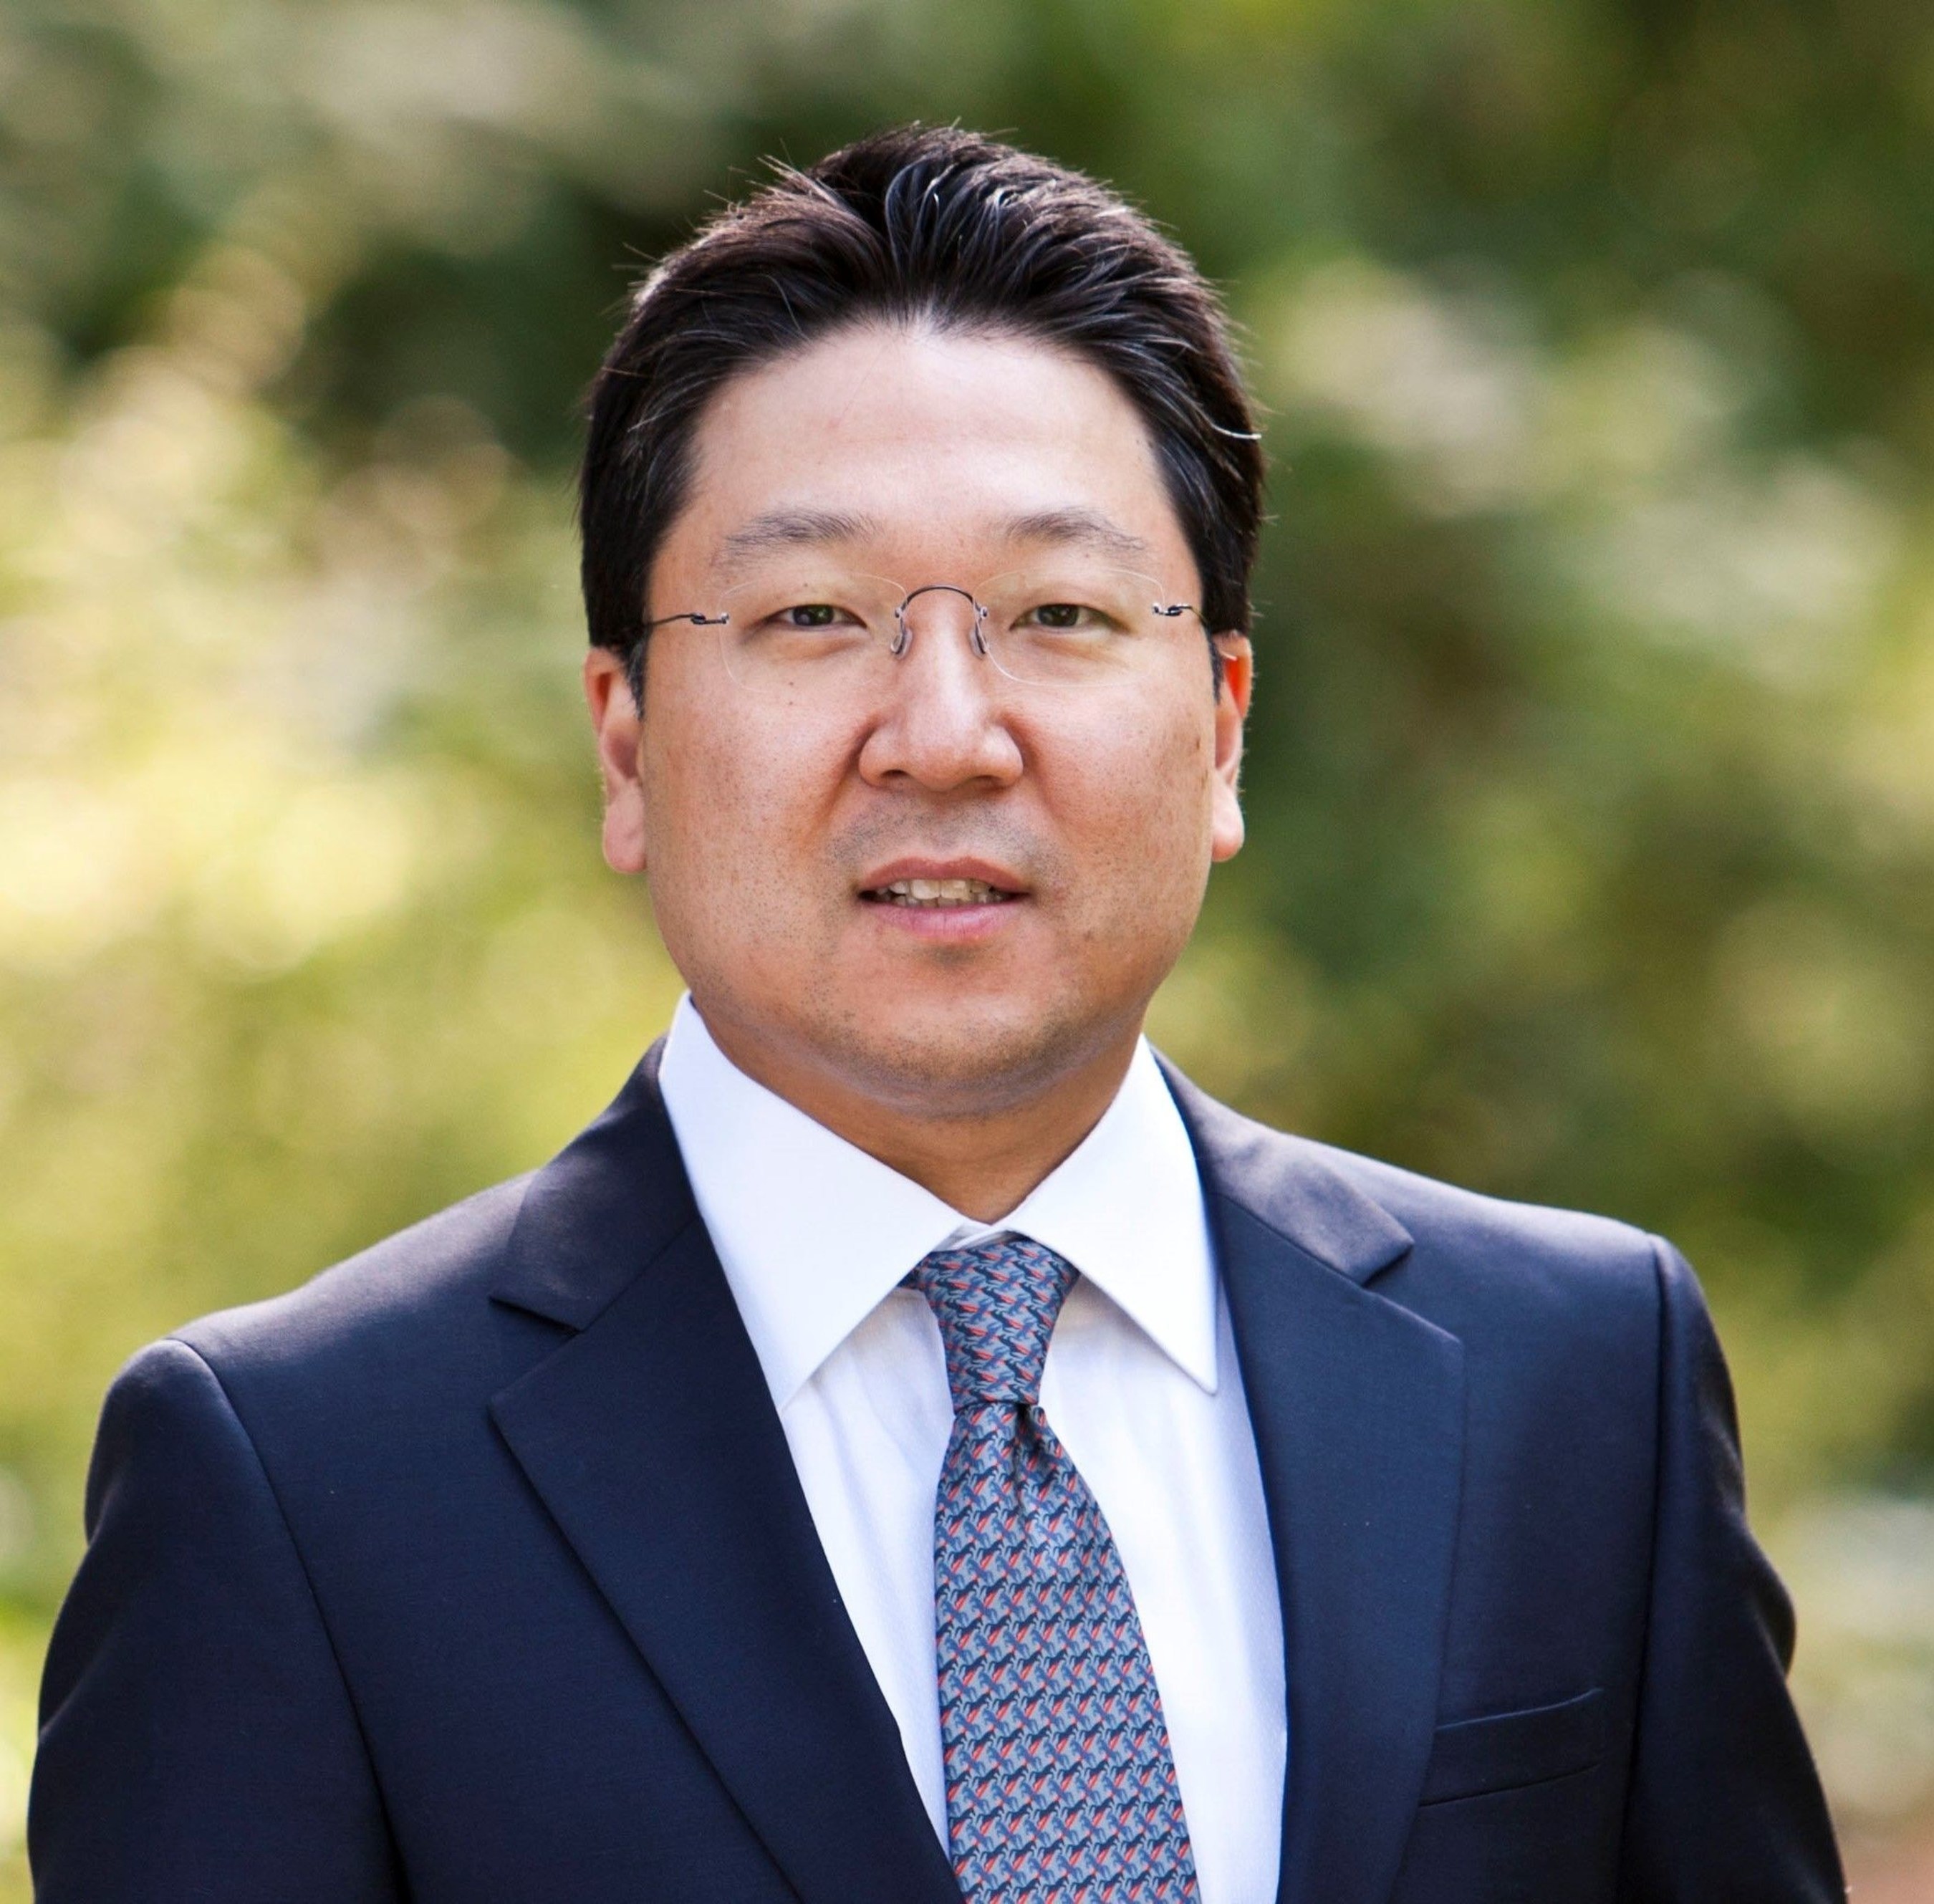 Dr. Charles K. Lee, Chief of Plastic Surgery and Director of Reconstructive Microsurgery, St. Mary's Medical Center (SMMC), San Francisco and Assistant Clinical Professor of Plastic and Reconstructive Surgery, University of California, San Francisco (UCSF) (PRNewsFoto/Medela AG)